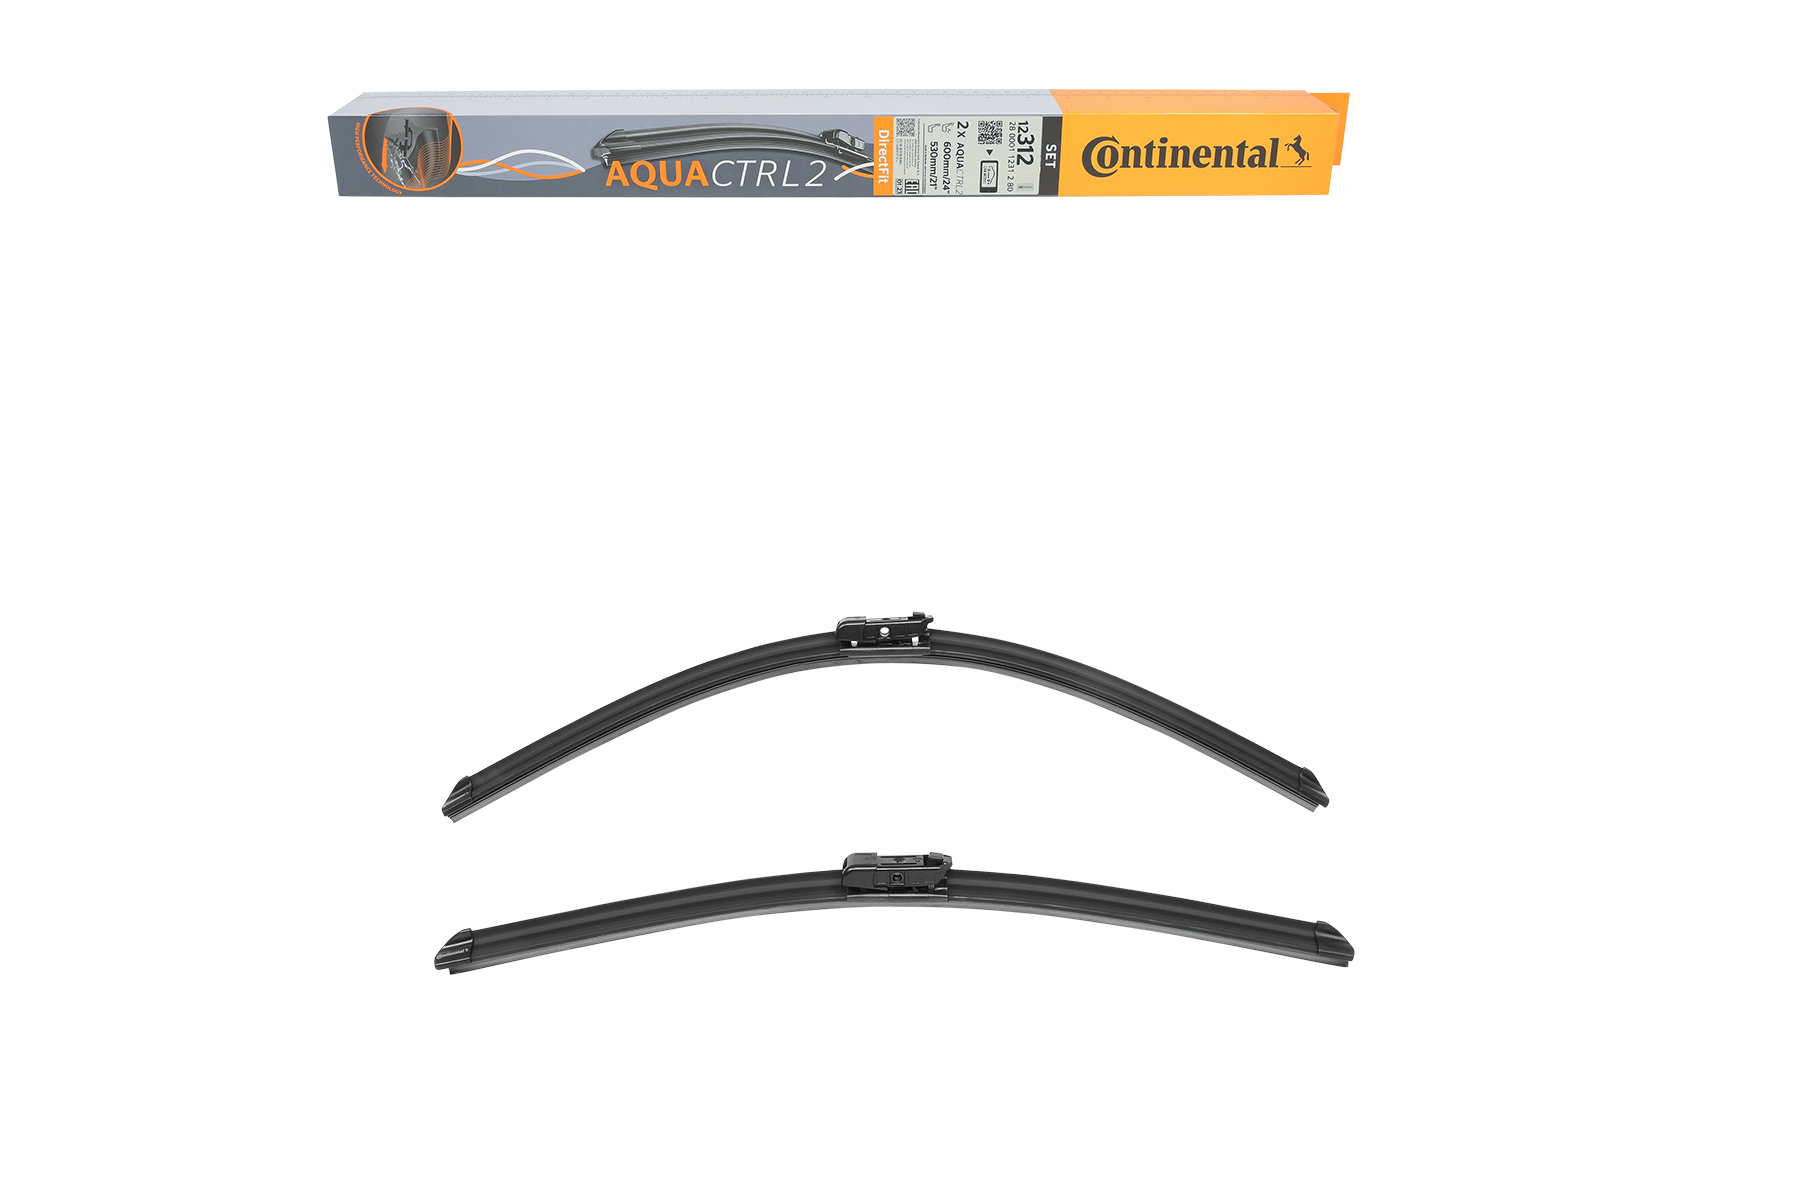 12312 Continental AQUACTRL2 600, 530 mm Front, Flat wiper blade, with spoiler, 24/21 Inch Styling: with spoiler Wiper blades 2800011231280 buy